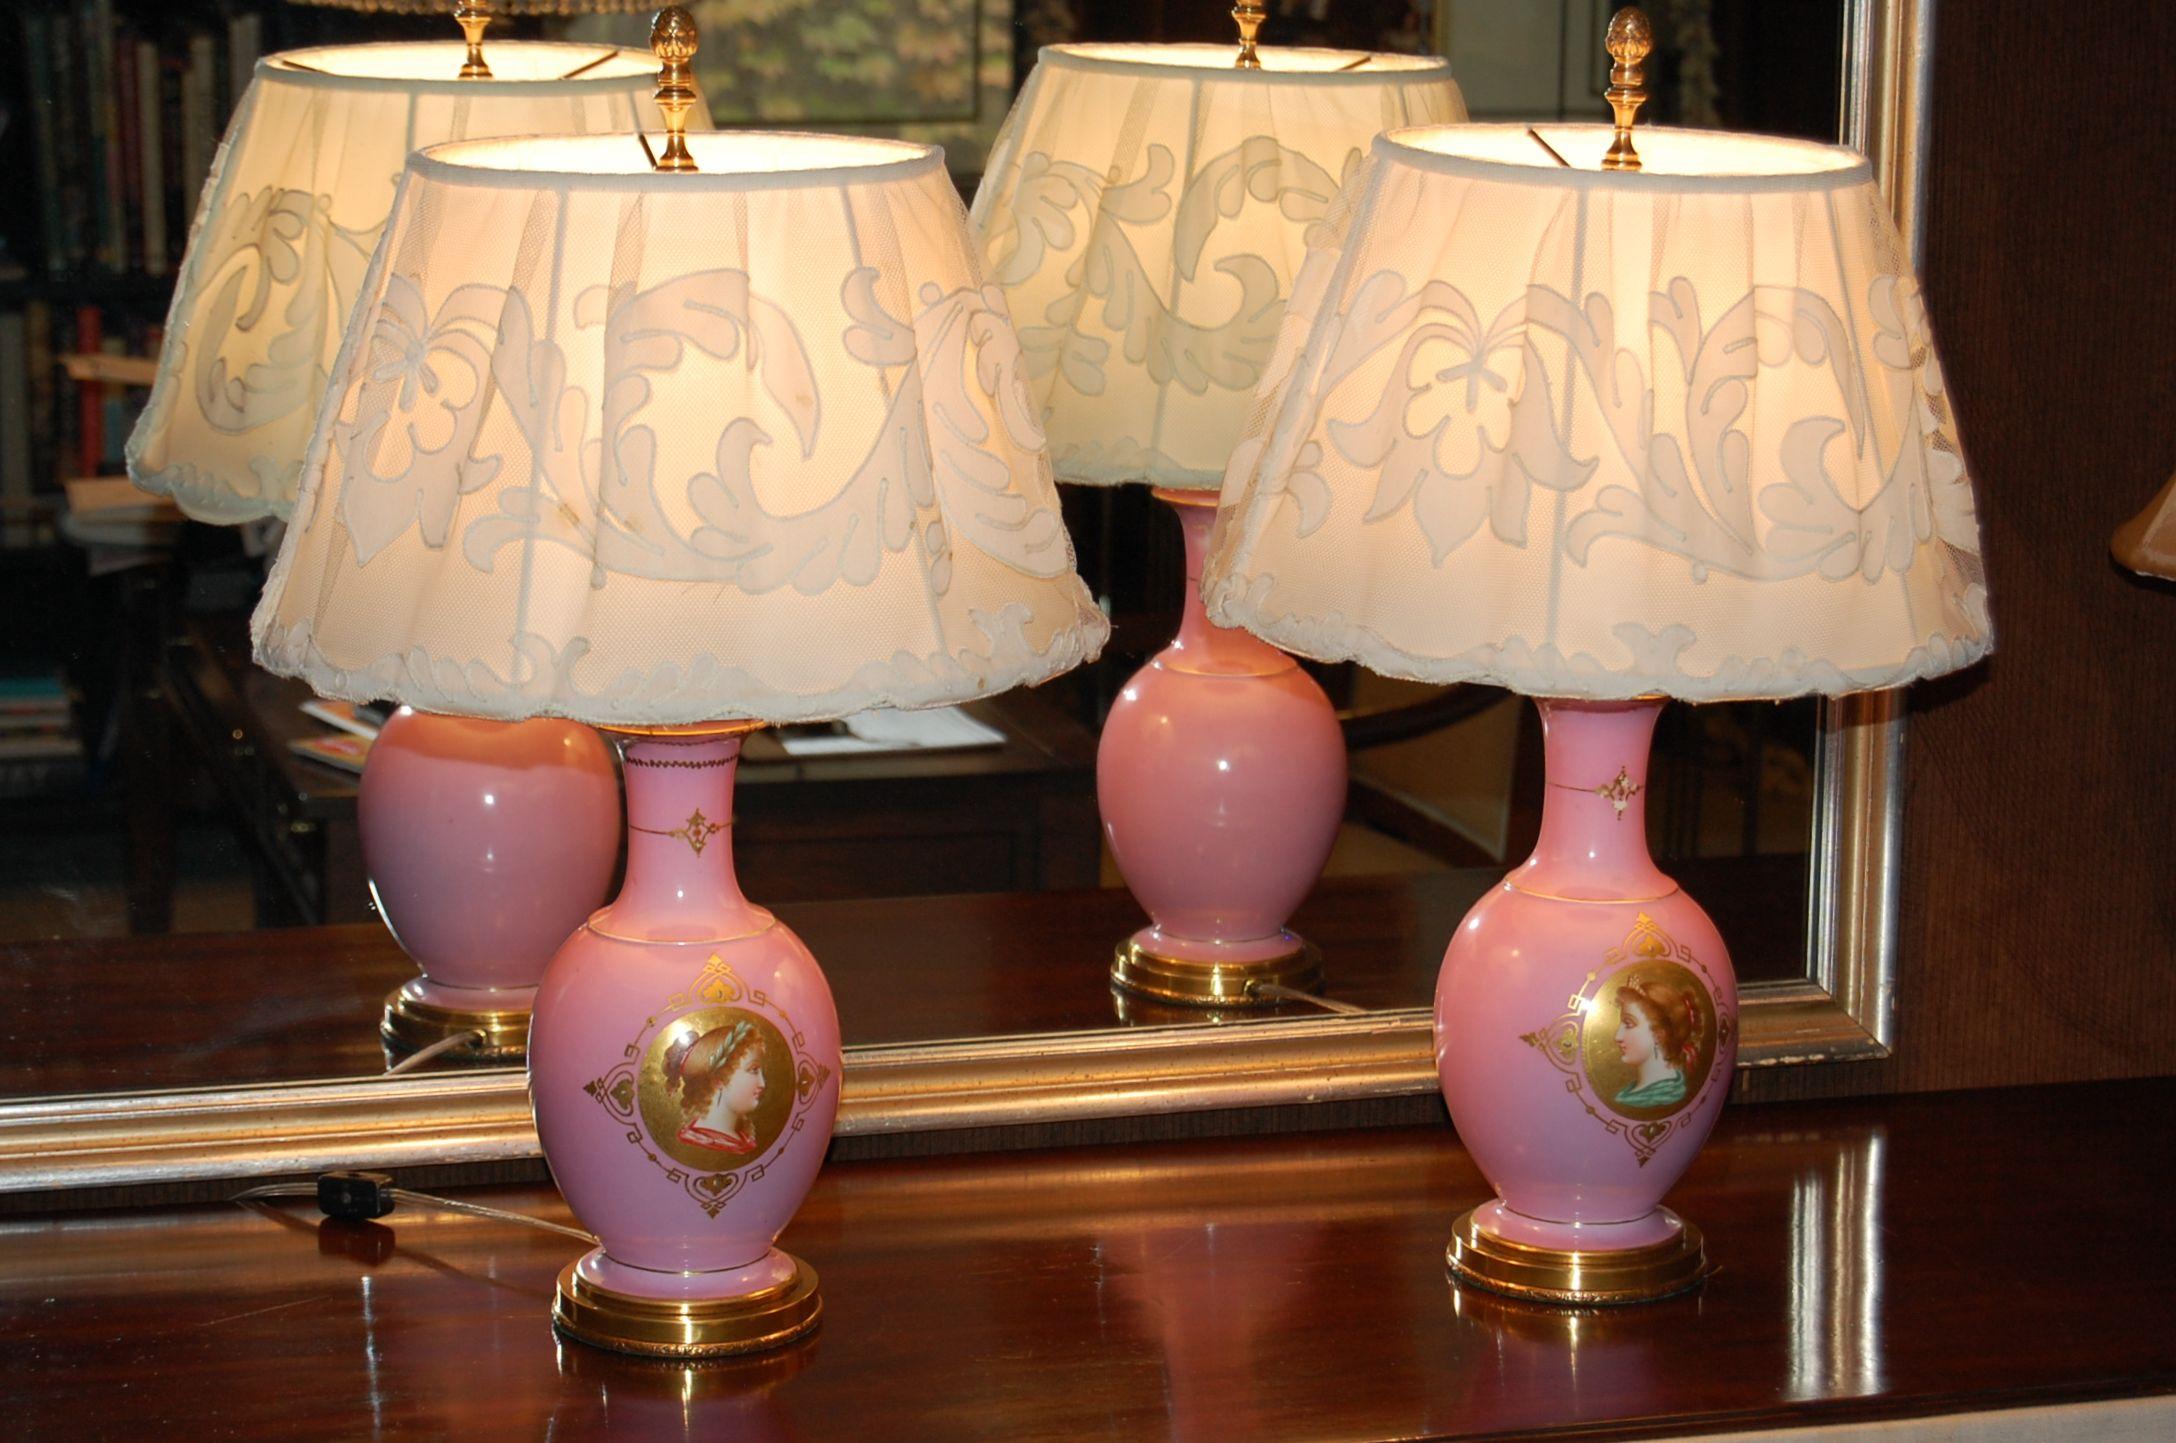 Pair of porcelain lamps just rewired with custom hand made cotton embroidered lampshades. The lamps each have a center medallion featuring a female bust hand painted on the front side. Mounted on brass bases. The shades were hand made in the 1980's